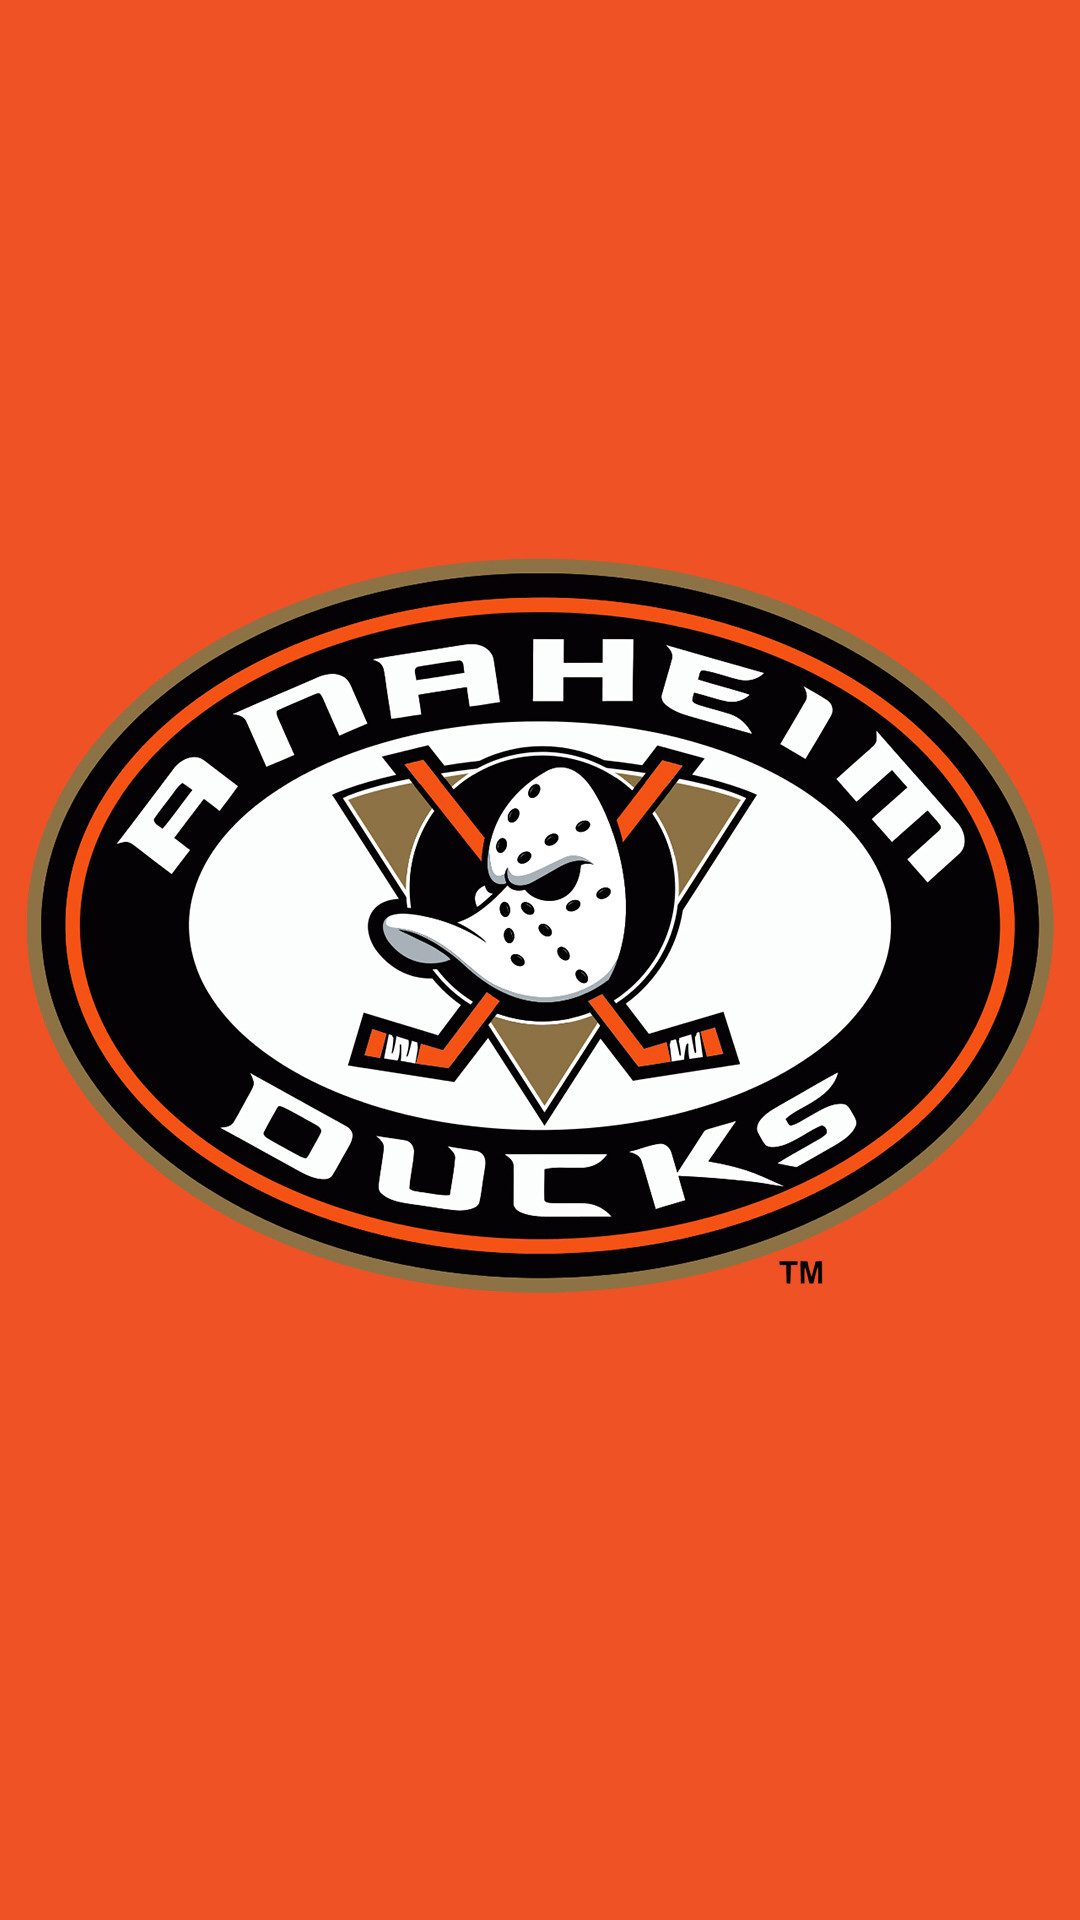 Free download Anaheim wallpapers Galerie Anaheim Ducks 800x600 for your  Desktop Mobile  Tablet  Explore 45 Anaheim Ducks Wallpapers  Oregon Ducks  Backgrounds Ducks Wallpaper Anaheim Ducks Wallpaper